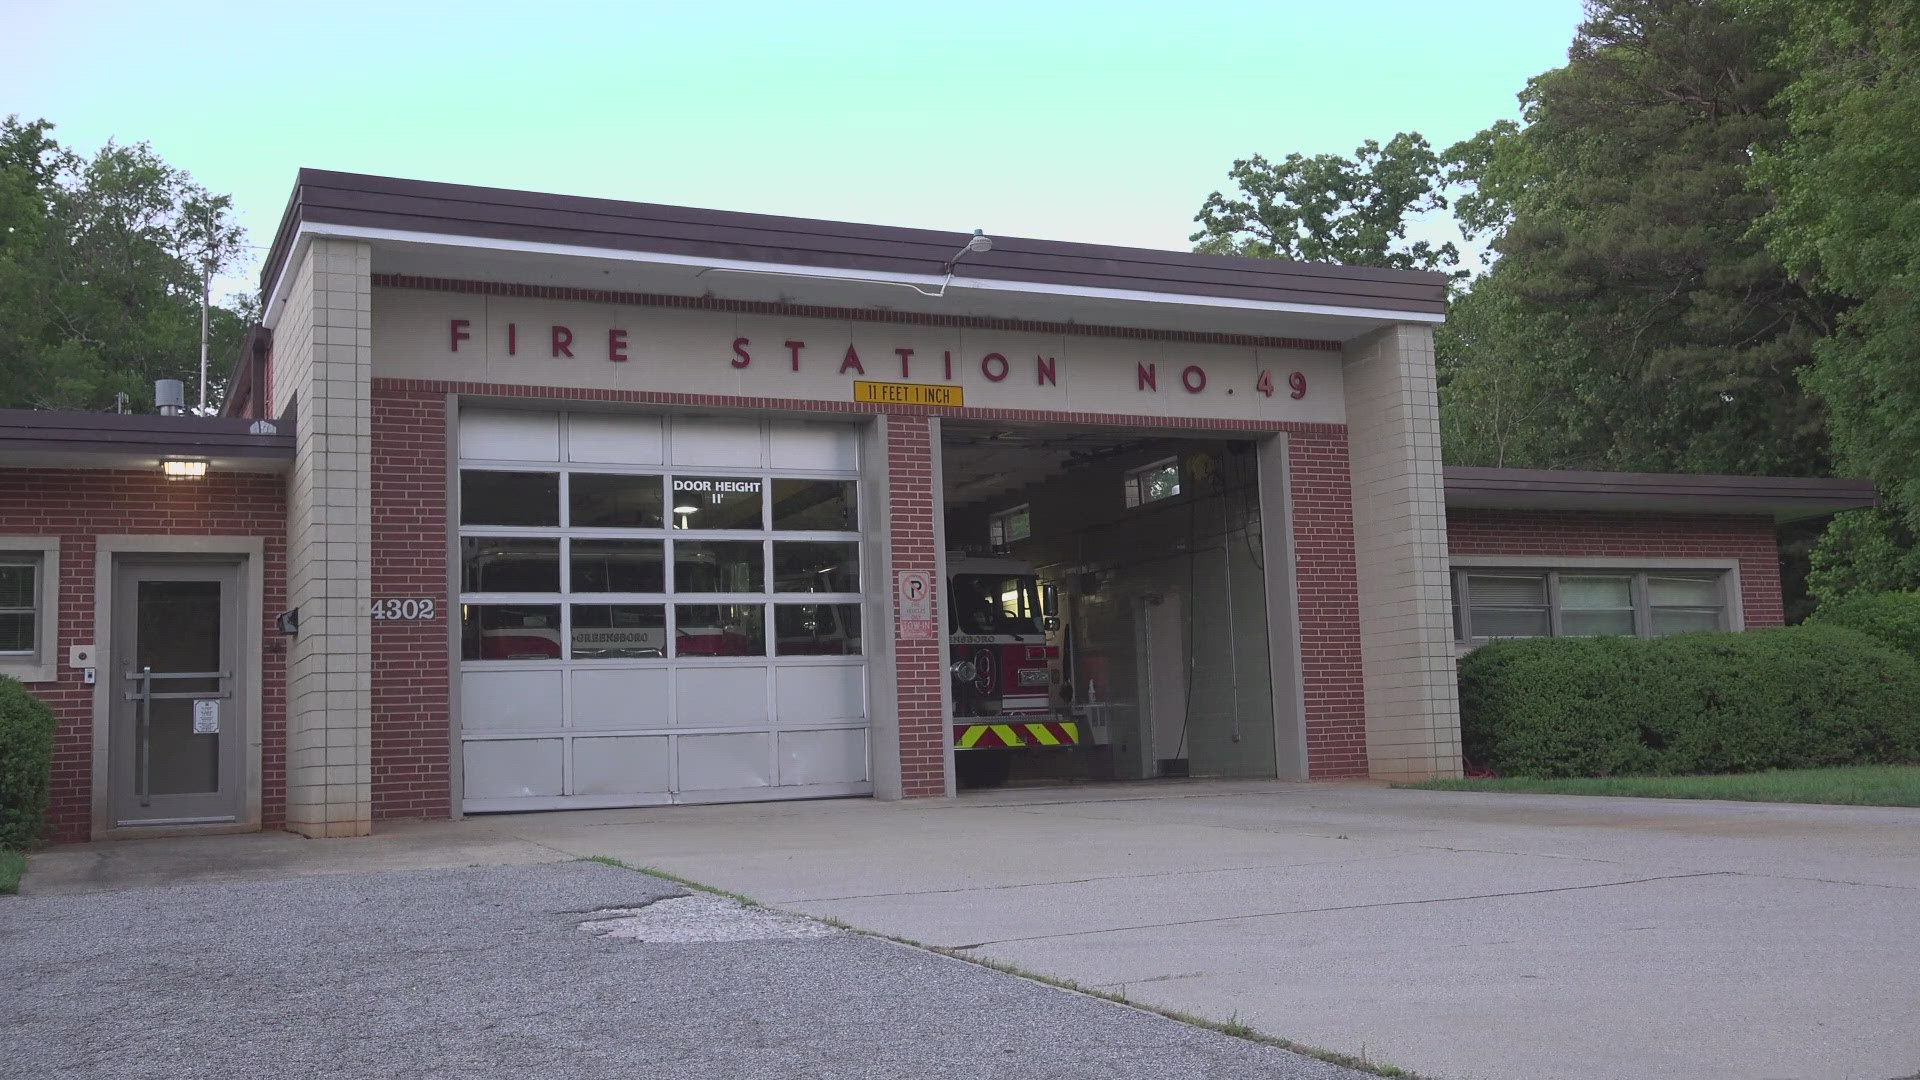 With the city’s population growing, GFD knows it needs to get ahead of the trends.